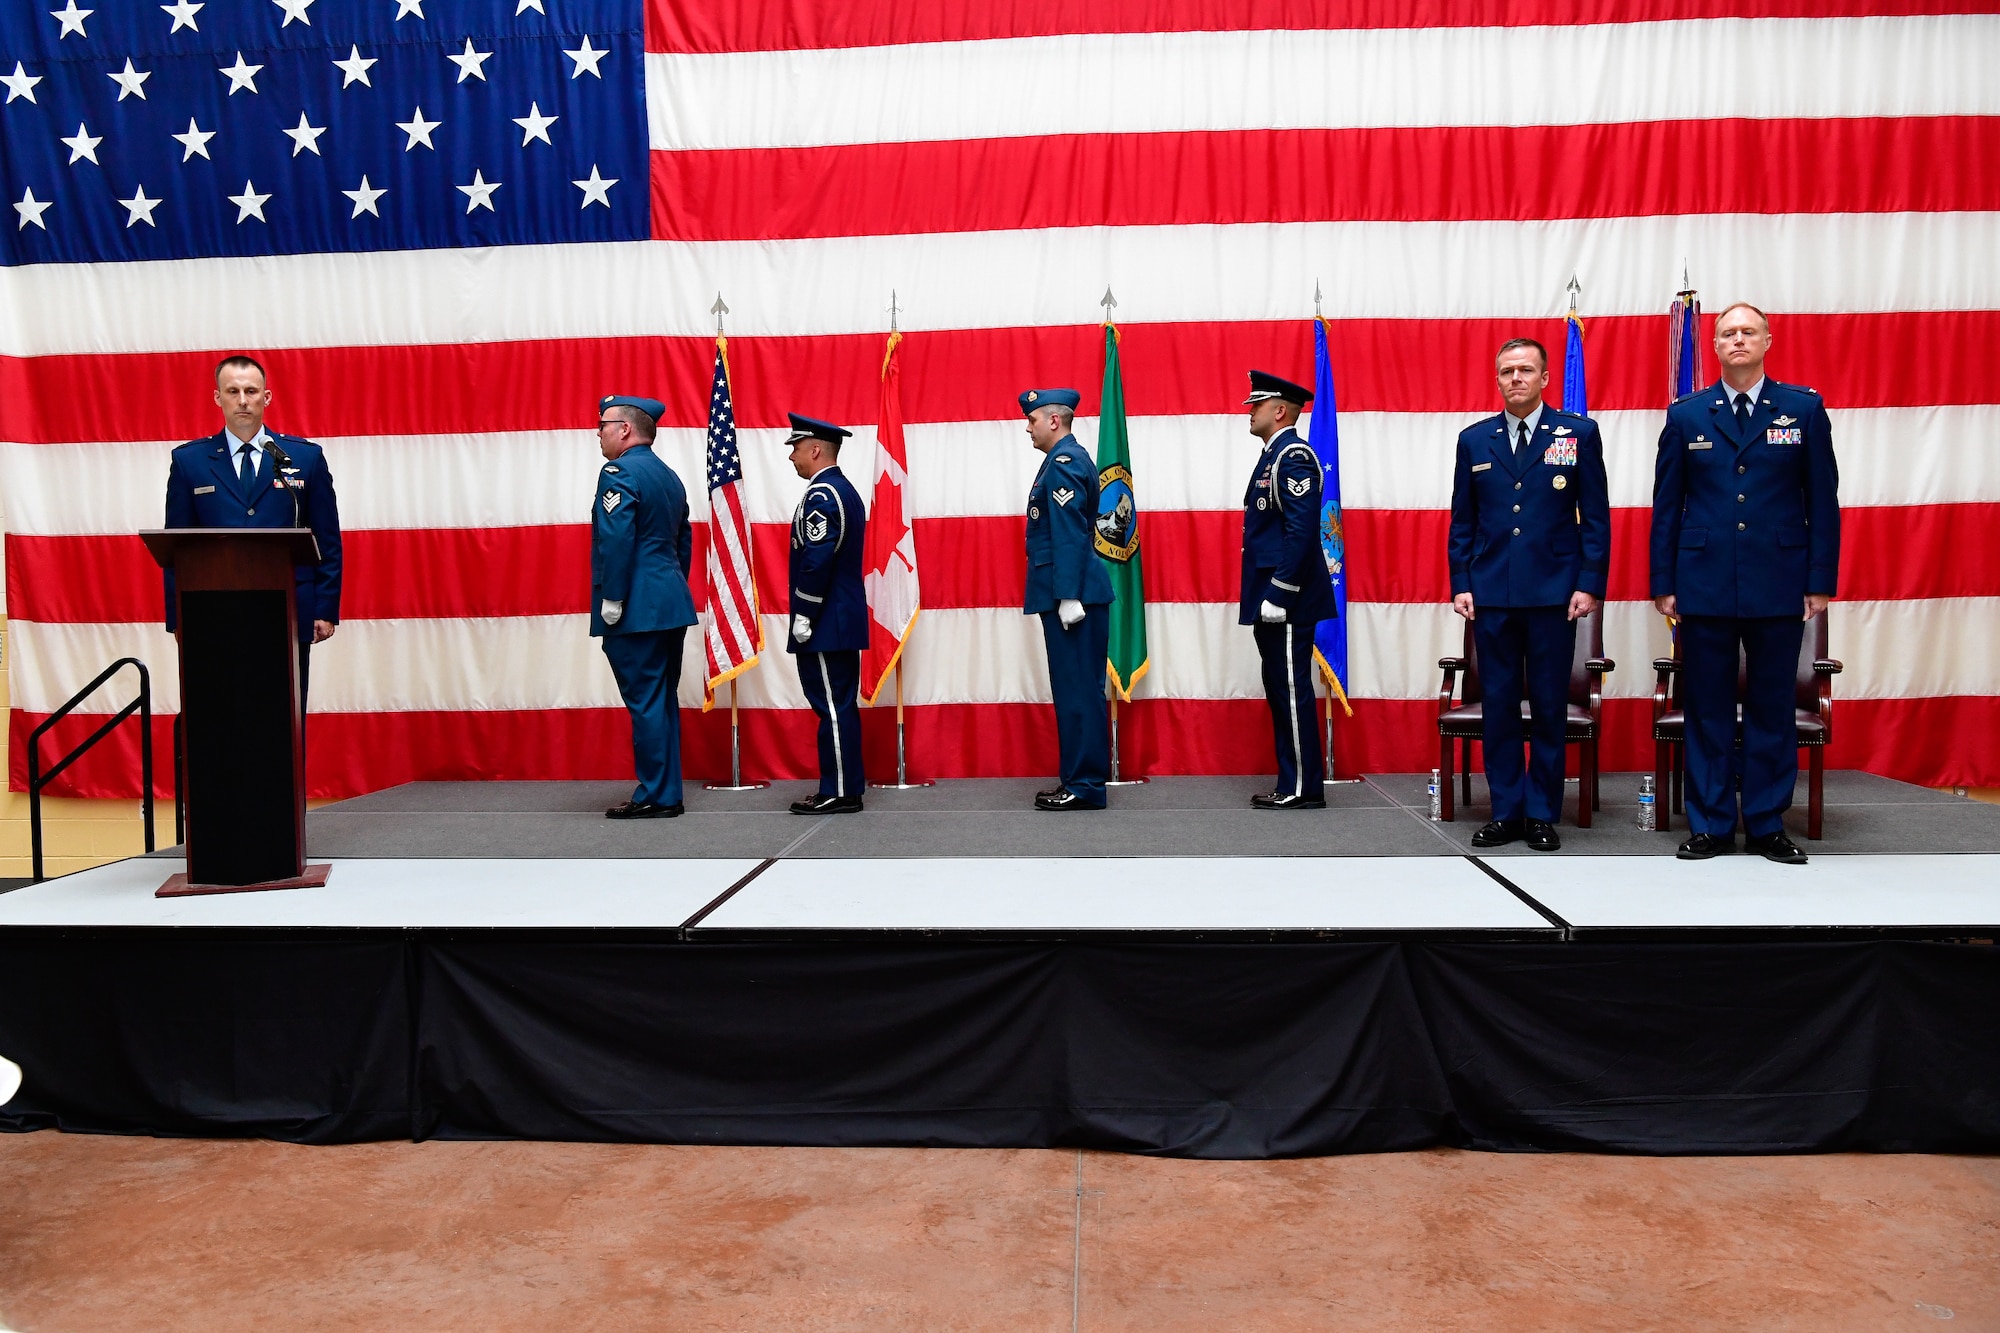 The Western Air Defense Sector Honor Guard post the colors during the WADS assumption of command ceremony at the Washington Army National Guard Readiness Center, Joint Base Lewis-McChord, Washington, July 31, 2018.  The new commander, Col. Gregory Lewis (right), stands beside the presiding officer, Brig. Gen. Kenneth Ekman, First Air Force and Air Forces Northern Command vice commander.